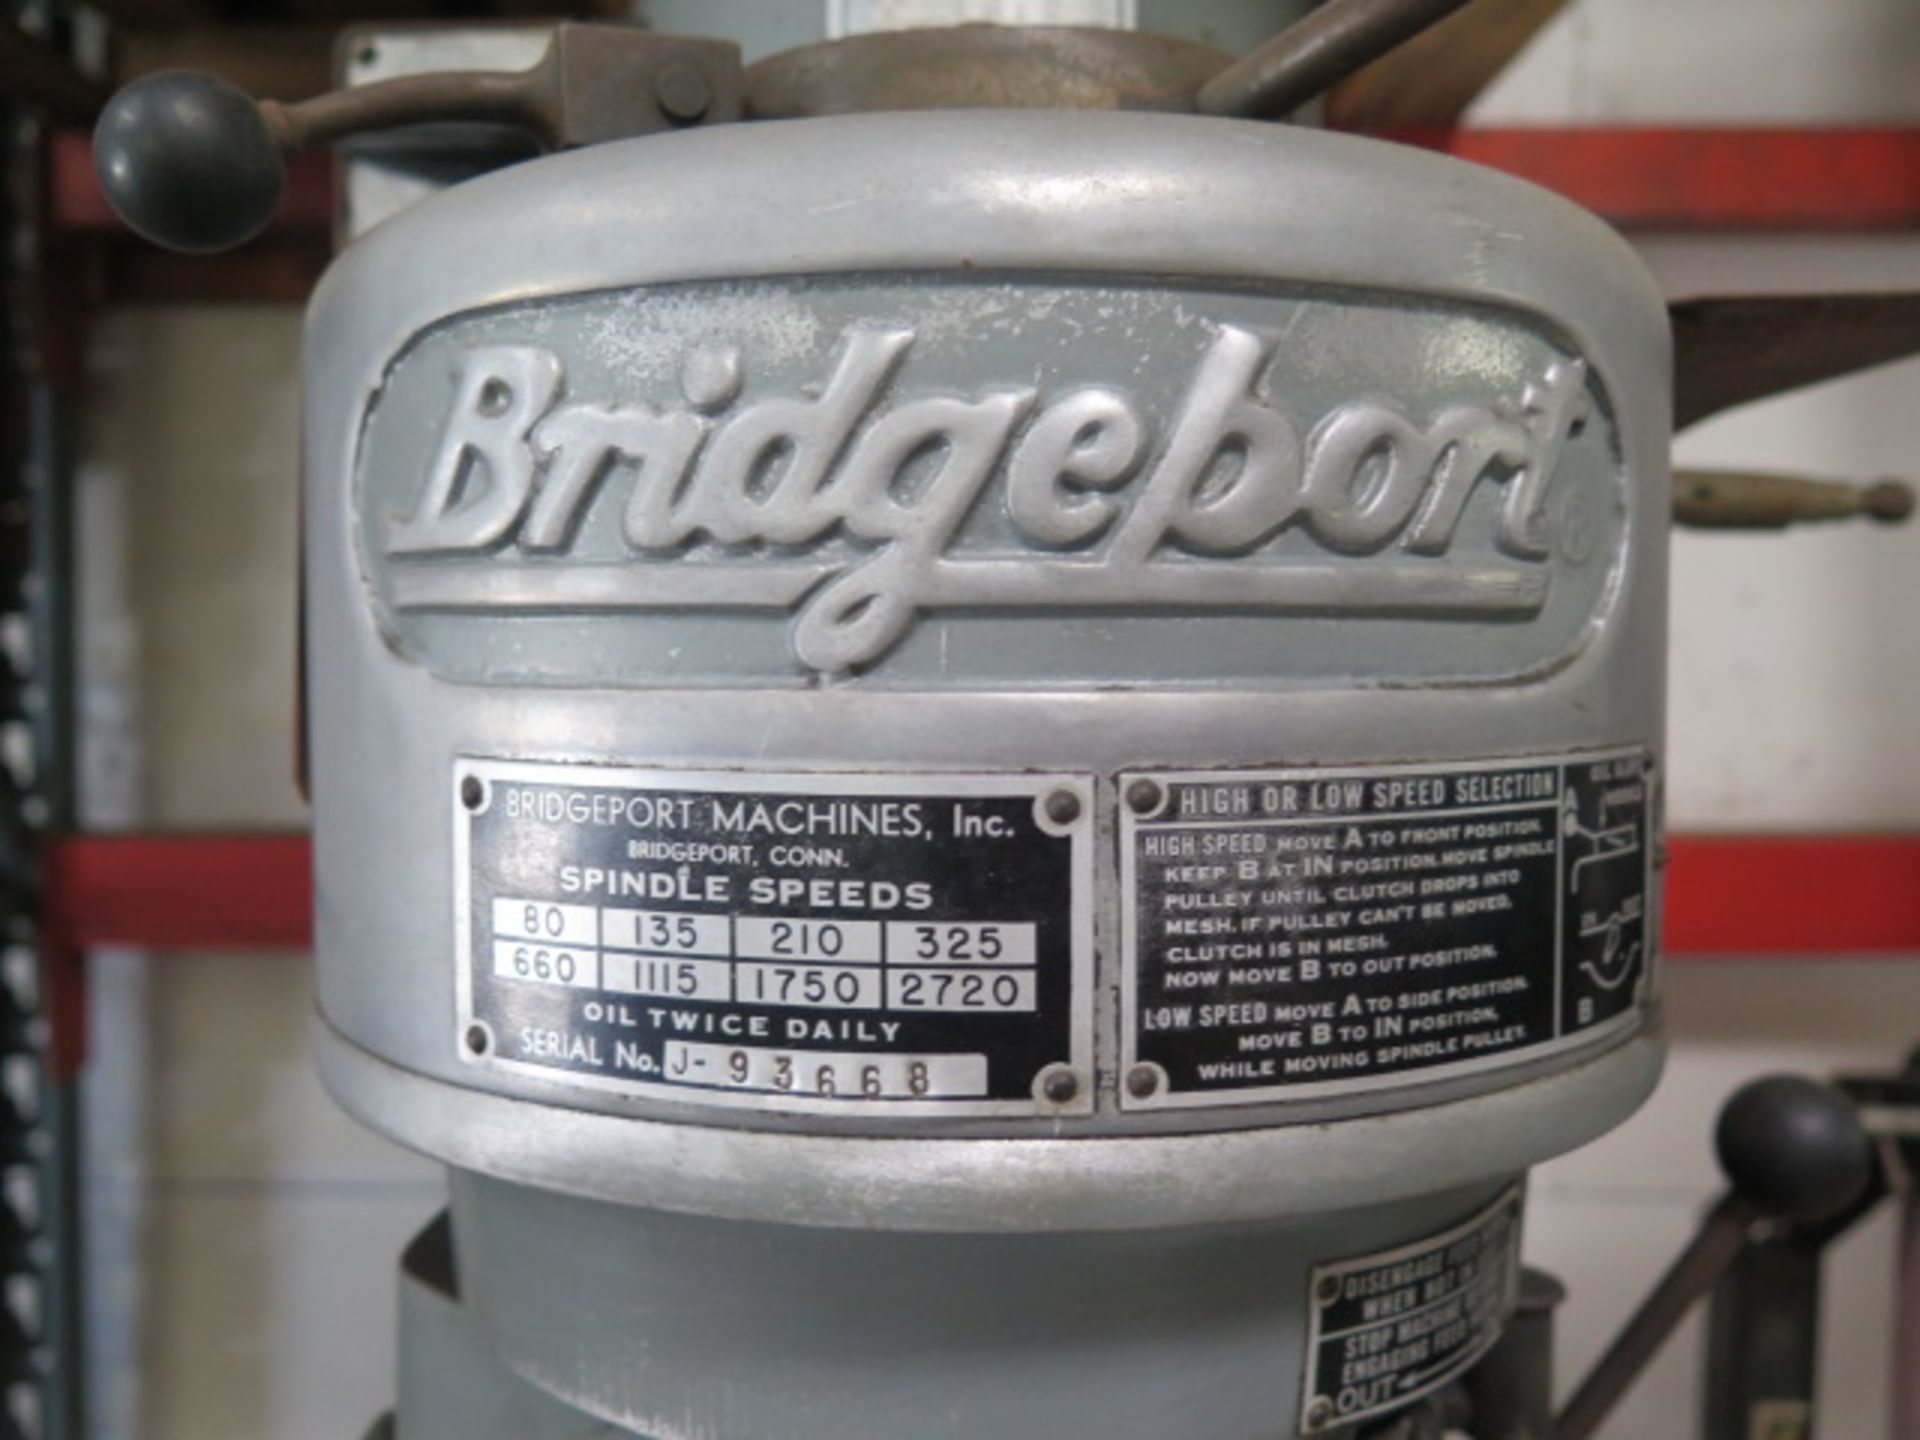 Bridgeport Vertical Mill w/ 1Hp Motor, 80-2720 RPM, 8-Speeds, Power Feed, 9" x 42" Table and 6" - Image 3 of 8